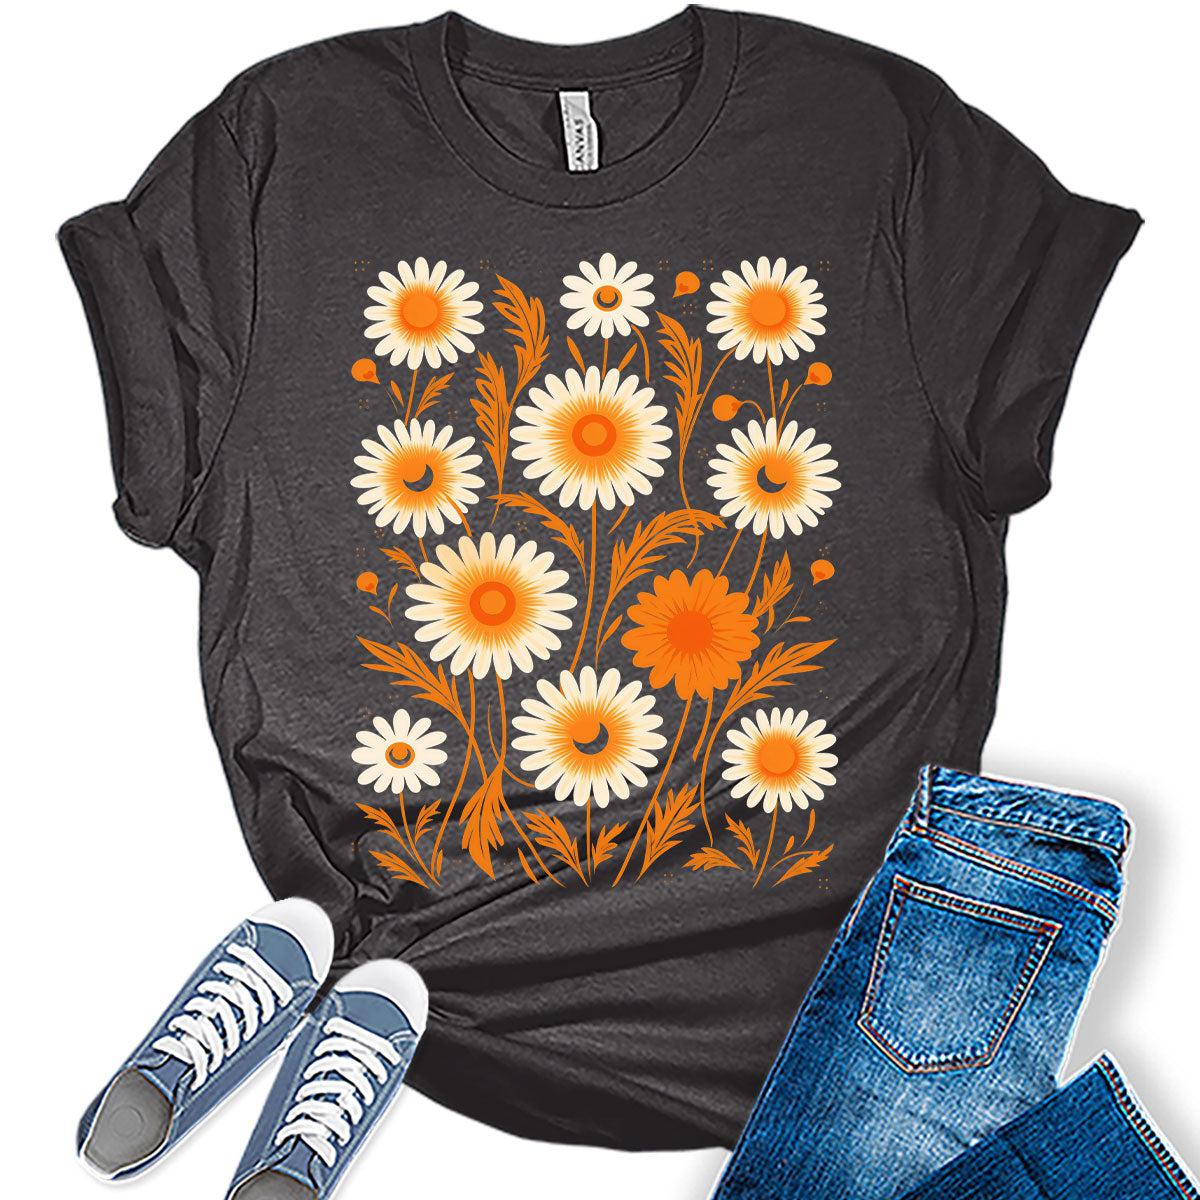 Fall Vintage Flower Collage Tshirt Women Boho Distressed Wildflowers Girls Graphic Tee Casual Nature Shirts Tops